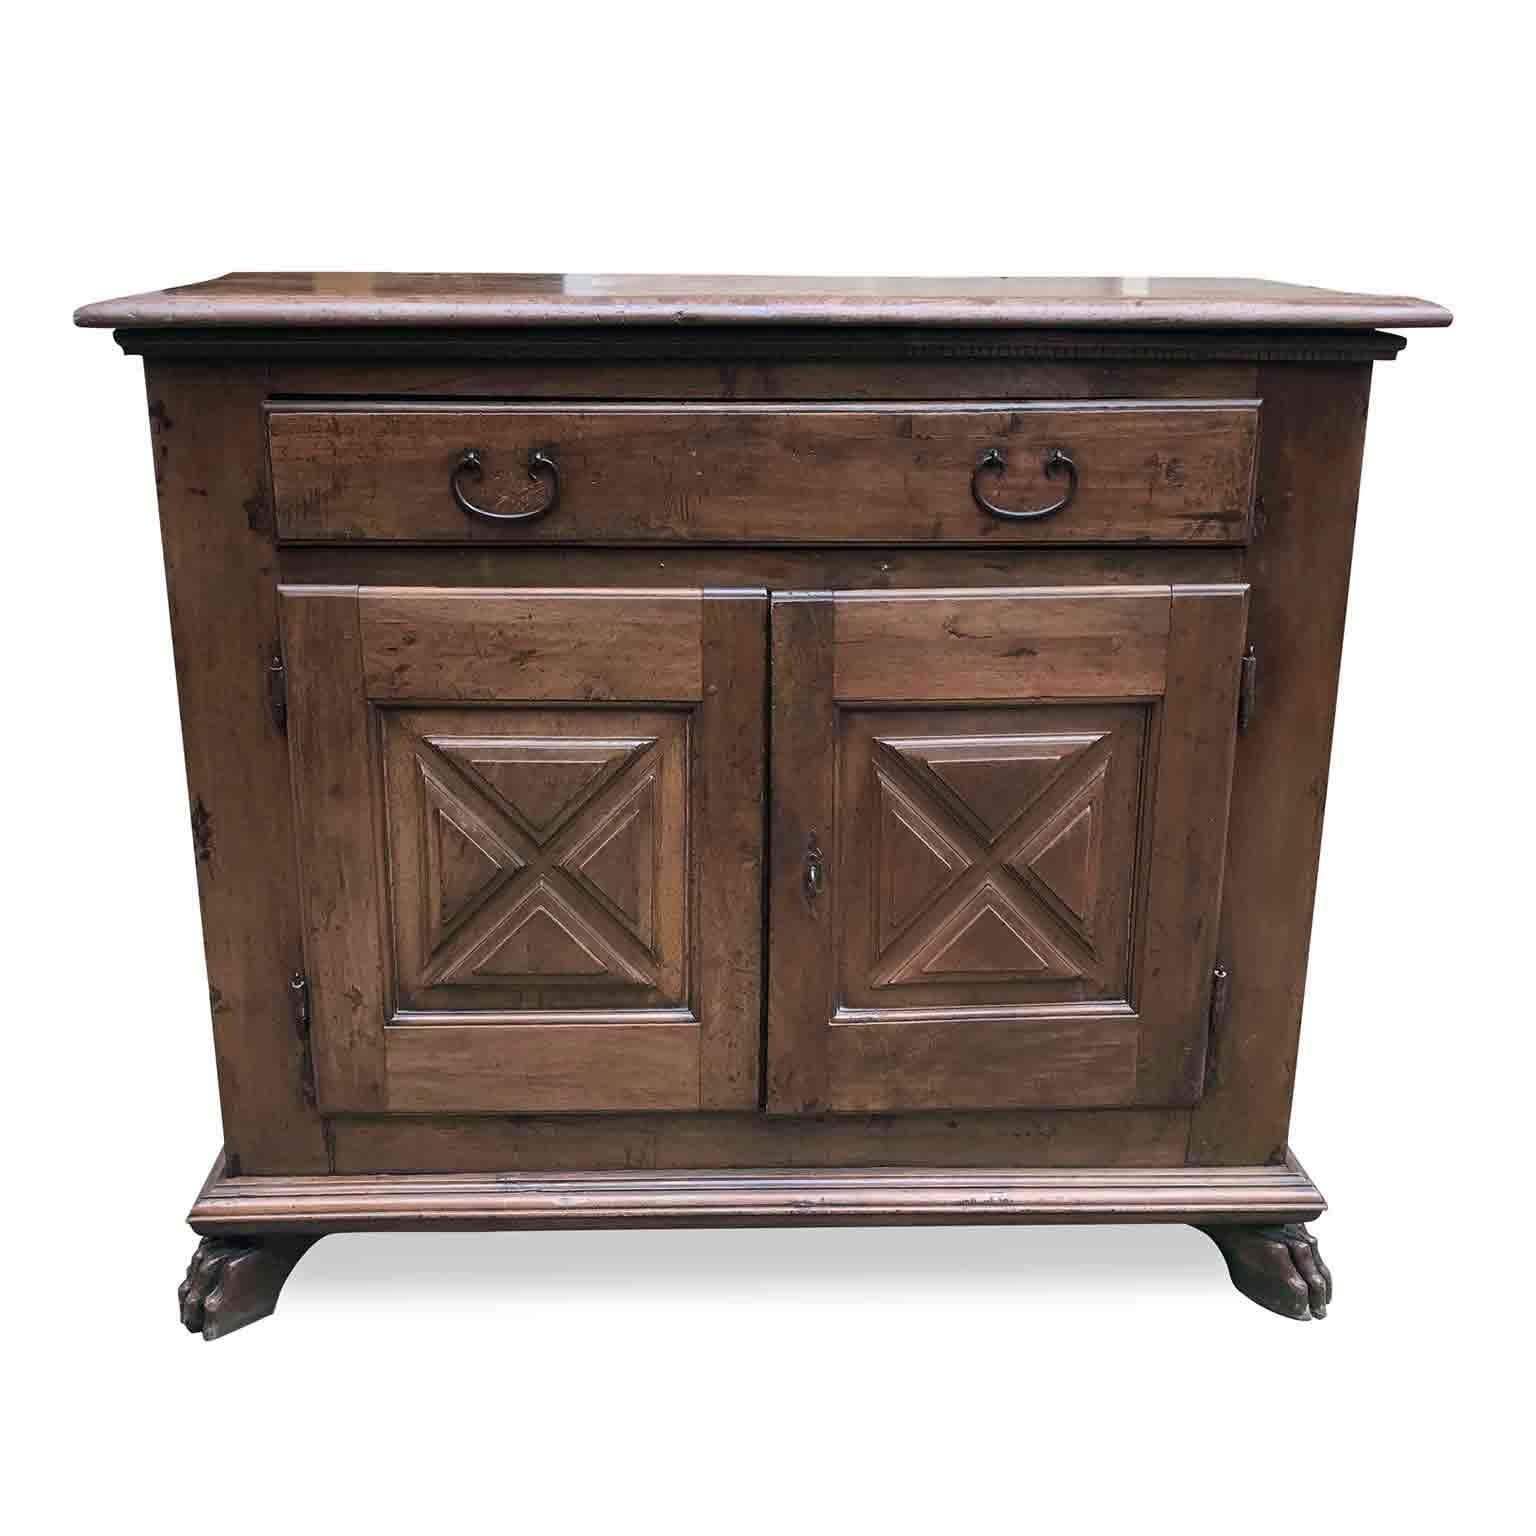 Hand-Carved 17th Century Italian Baroque Sideboard Two Doors with Diamond Carved Panels 